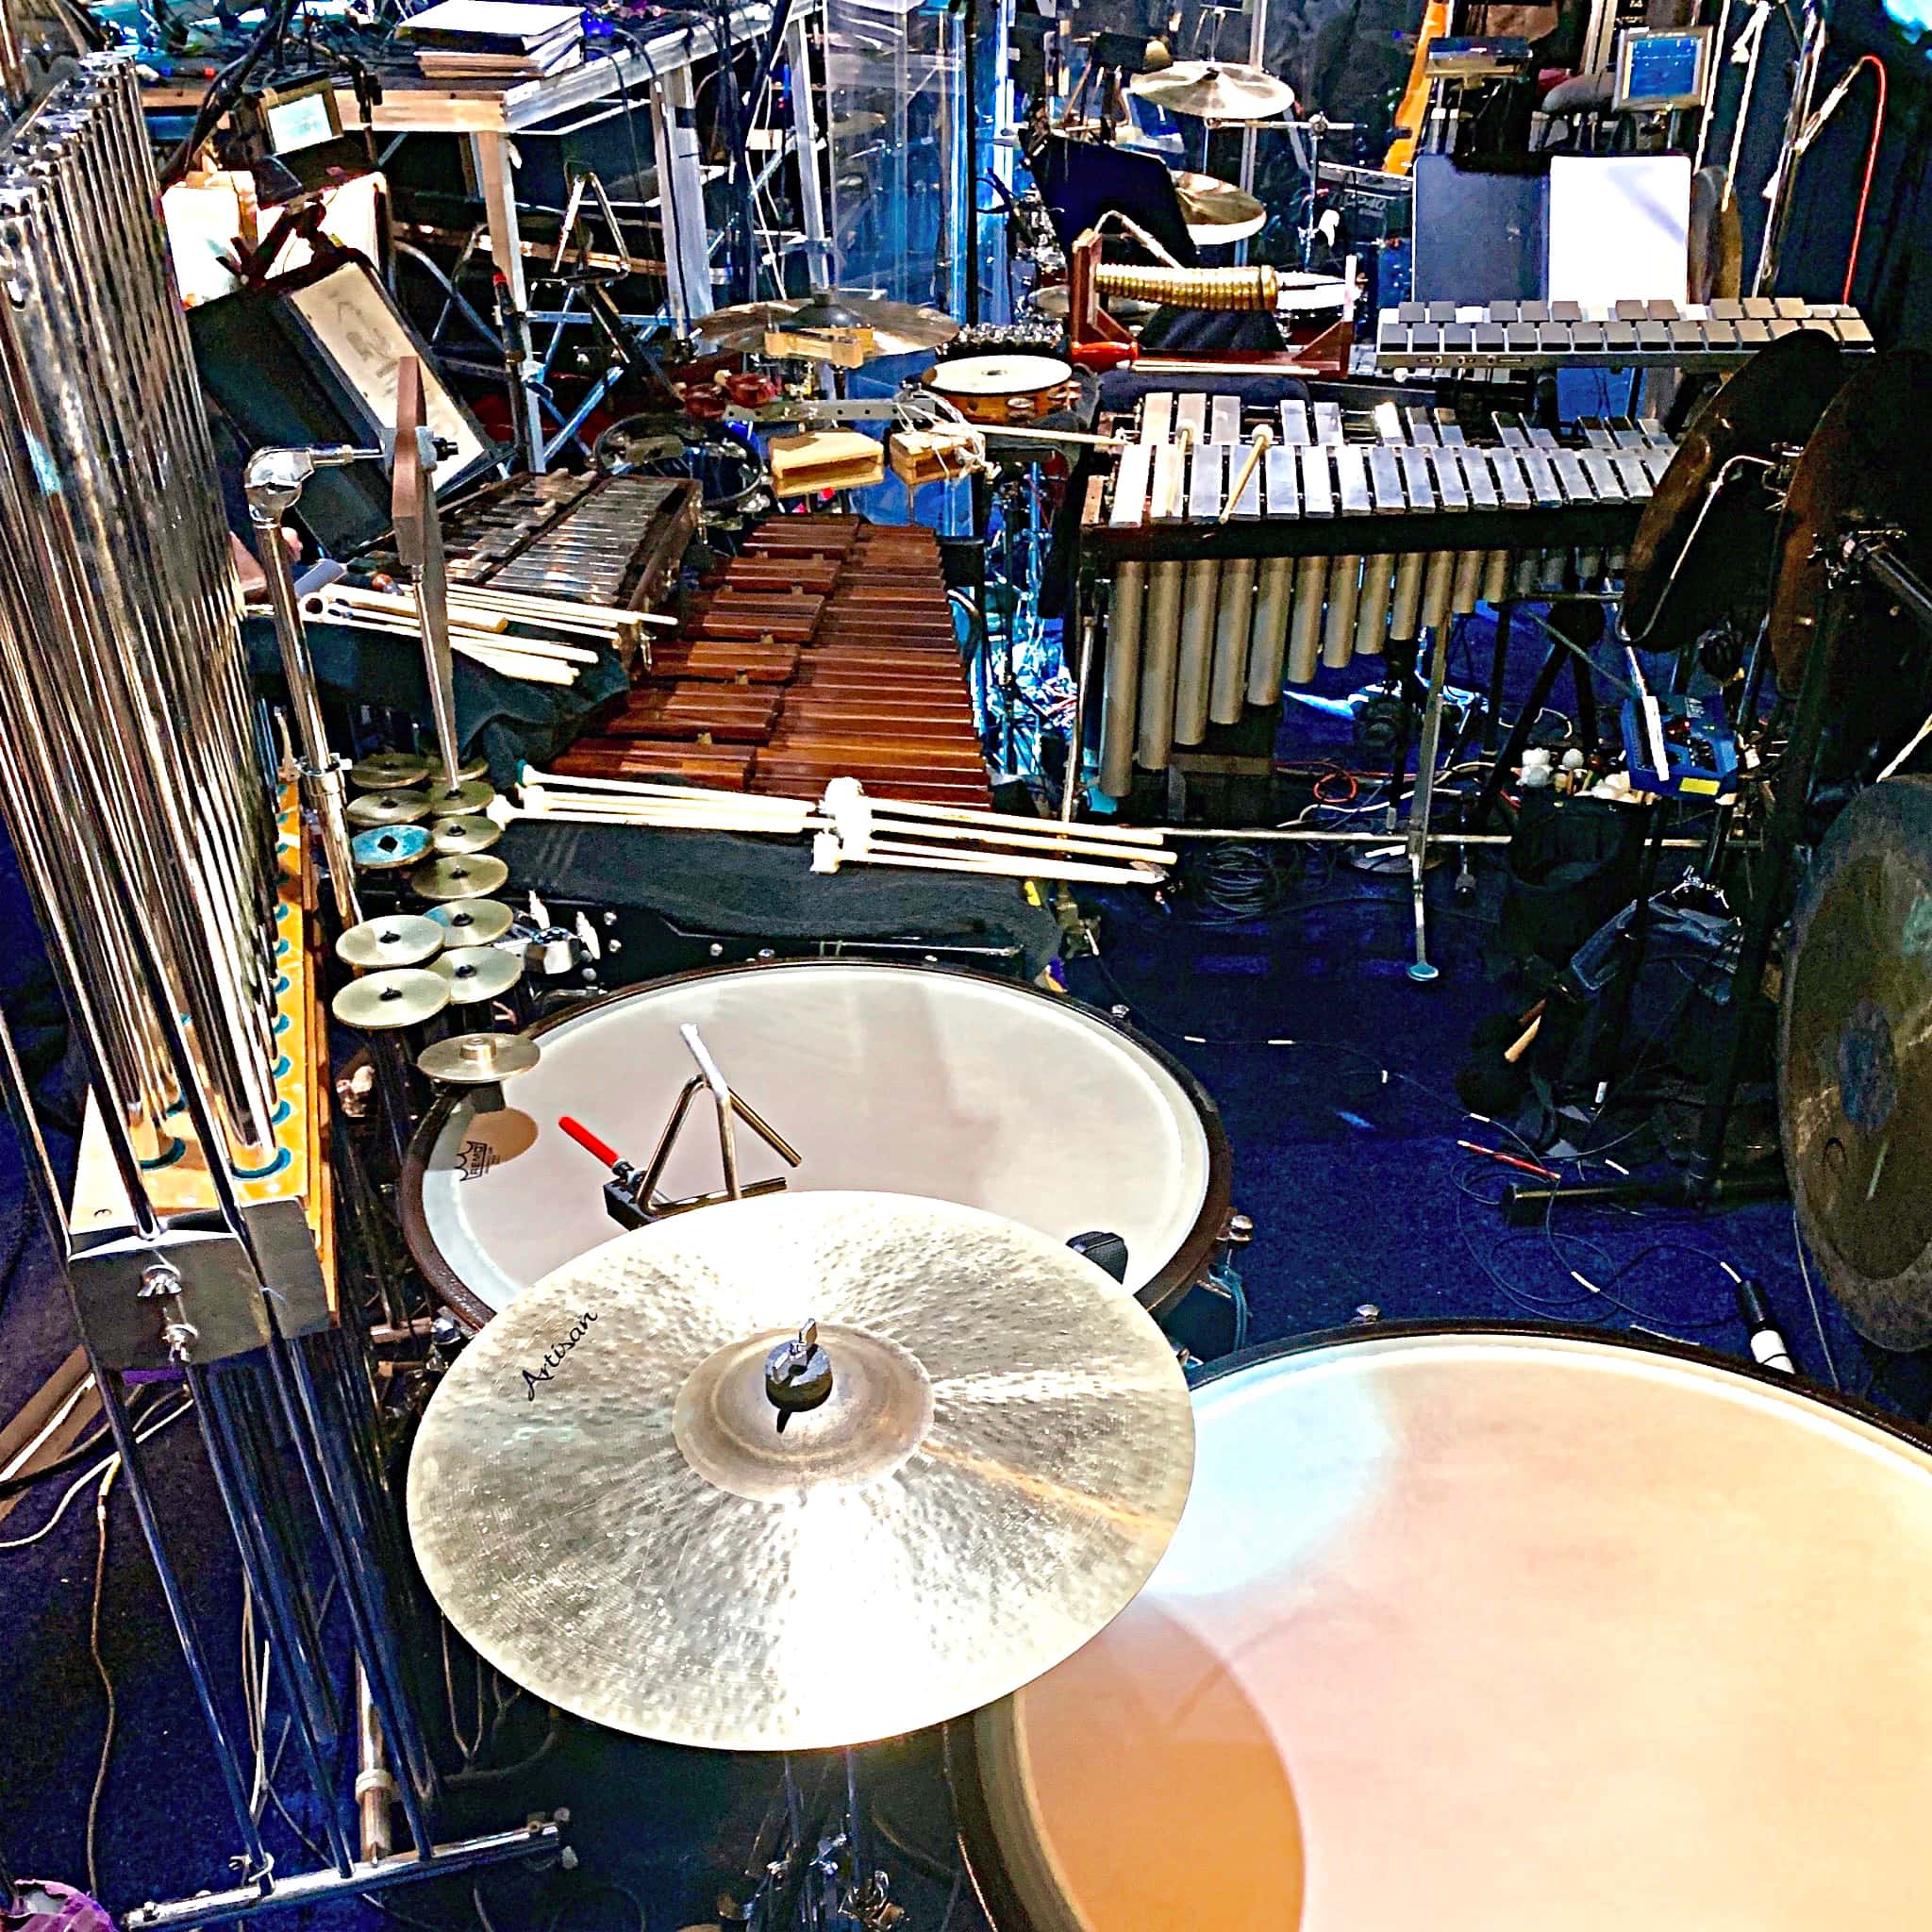 Luke Hubley’s percussion setup for Beauty and the Beast at Theater Under The Stars in Houston Texas.